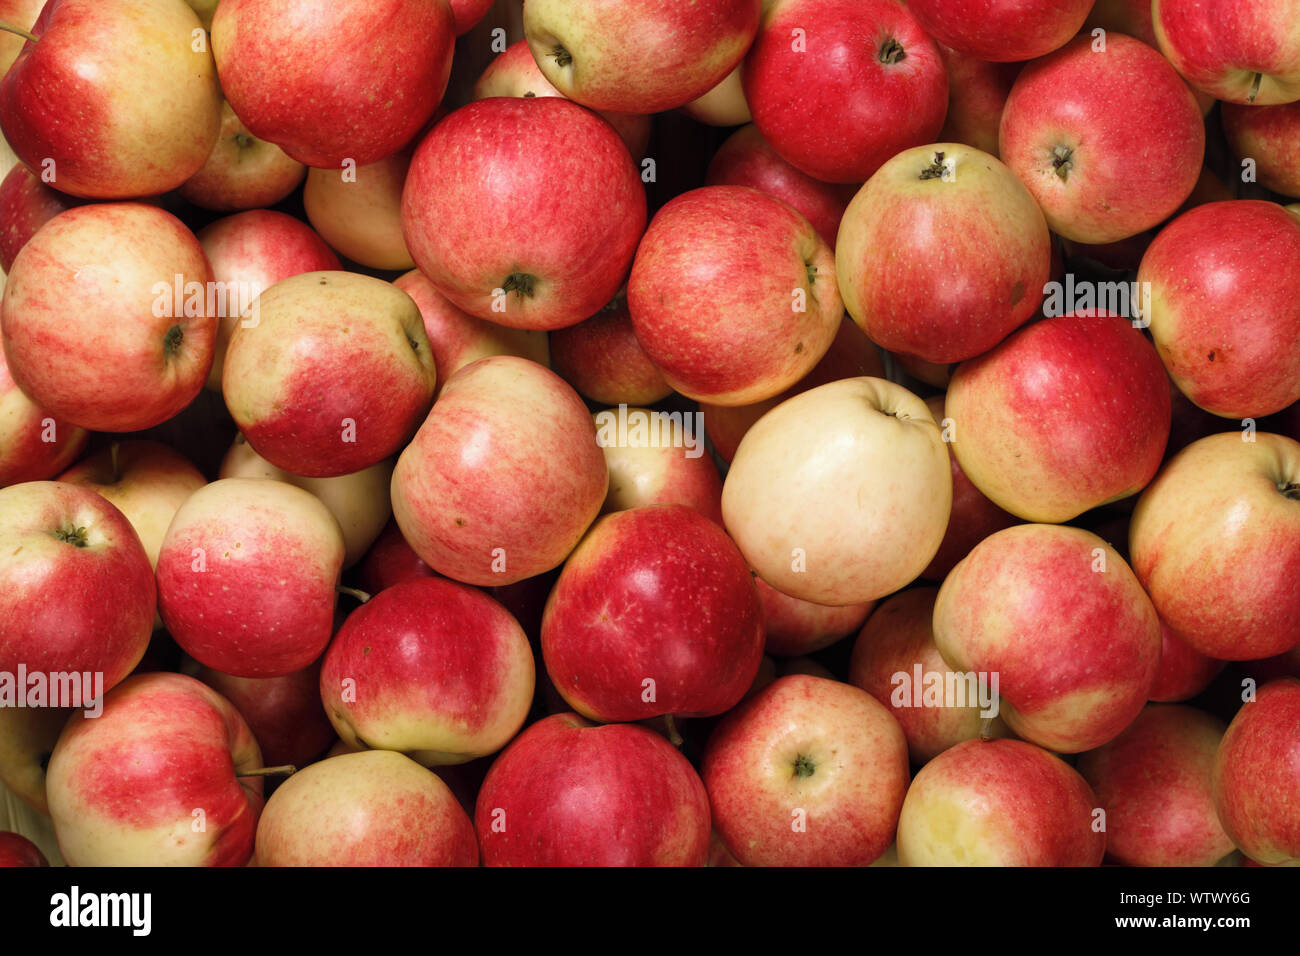 Lots of red apples. Natural condition. Top view. Stock Photo